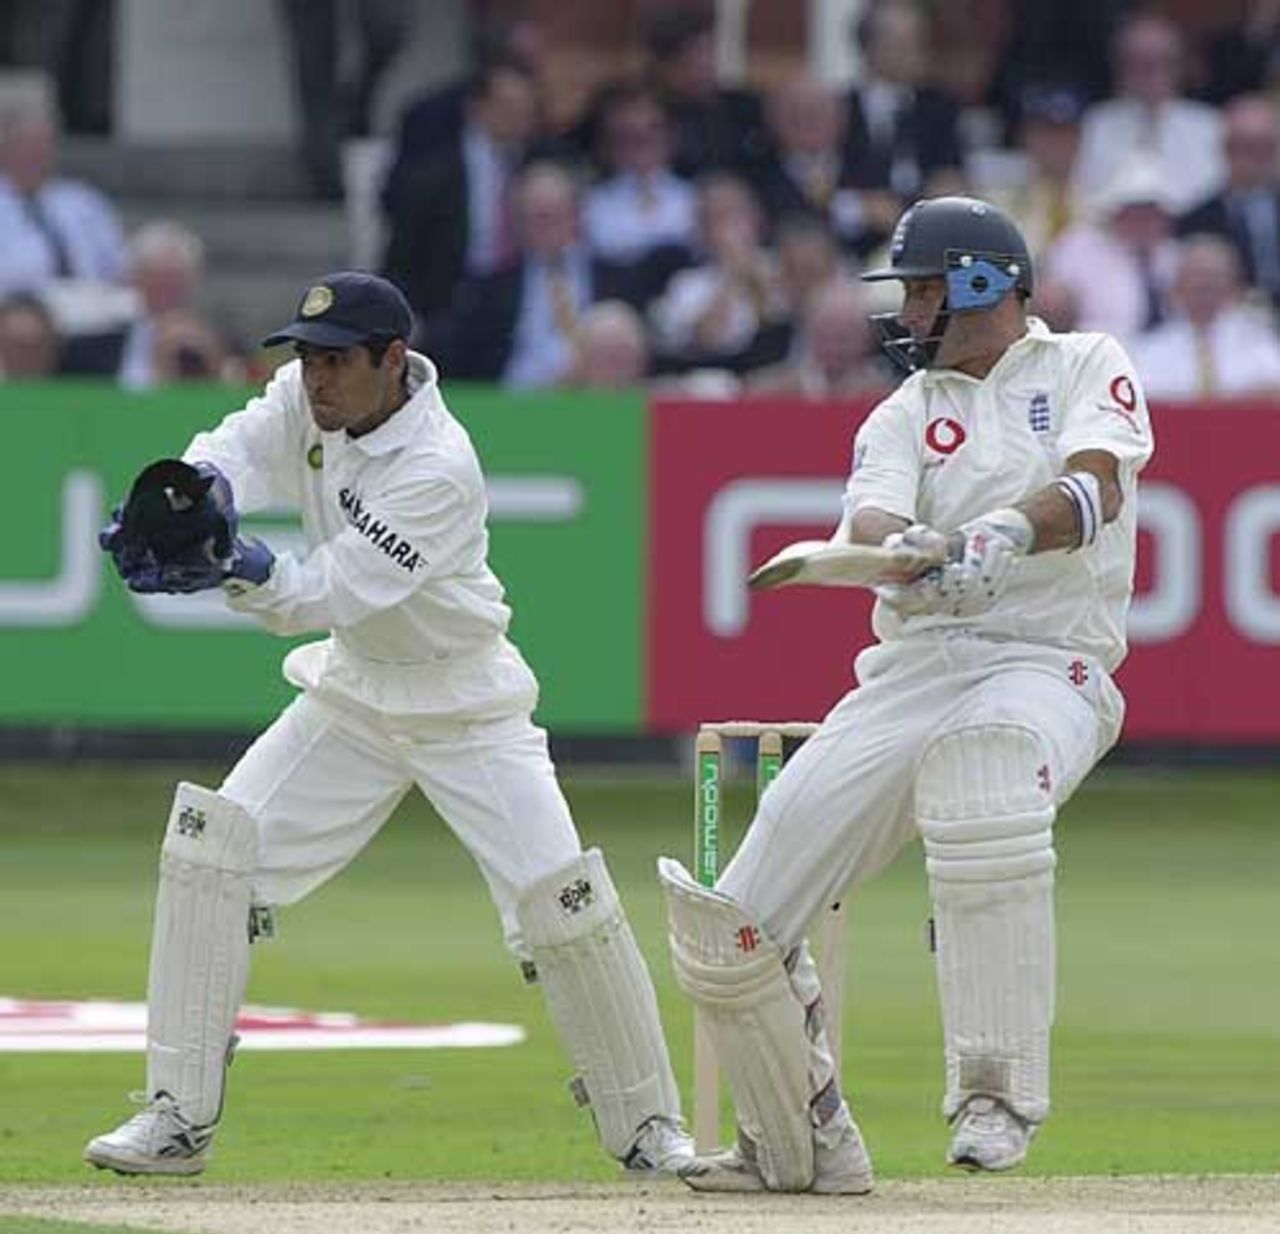 Nasser Hussain with a savage cut shot in his century, England v India, 1st npower Test at Lord's